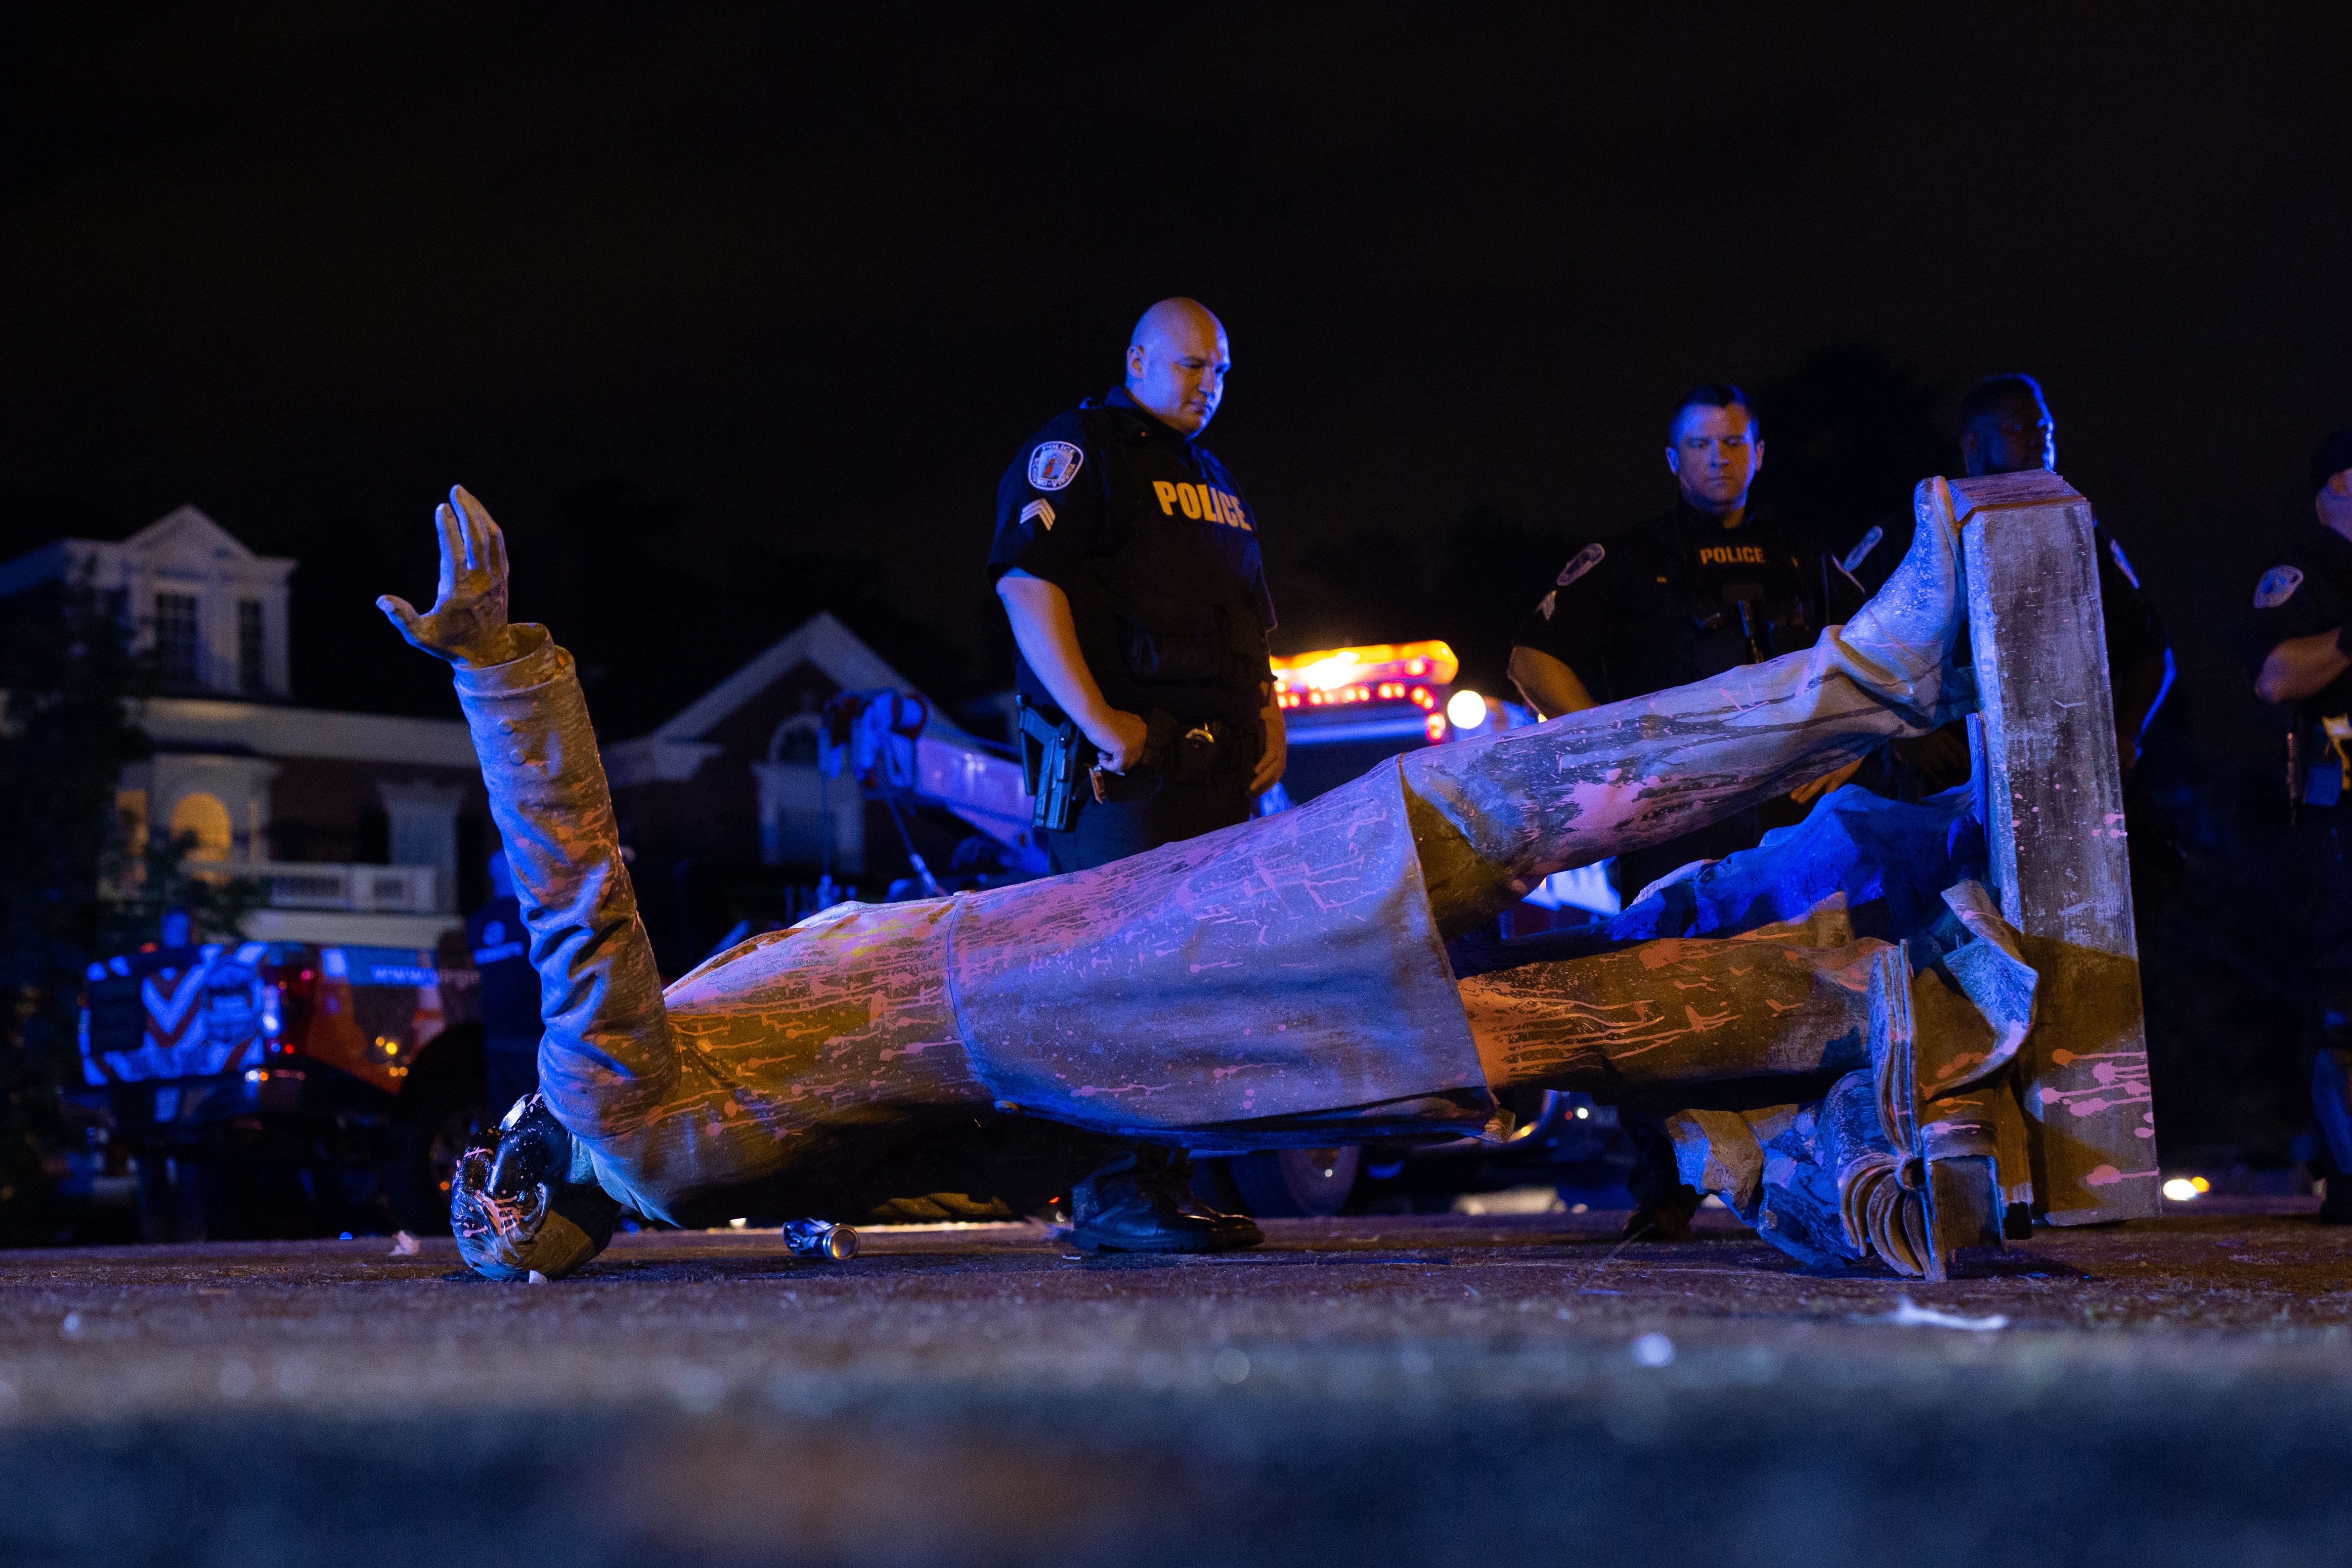 TOPSHOT - A statue of Confederate States President Jefferson Davis lies on the street after protesters pulled it down in Richmond, Virginia, on June 10, 2020. - The symbols of the Confederate States and its support for slavery are being targeted for removal following the May 25, 2020, death of George Floyd while in police custody. (Photo by Parker Michels-Boyce / AFP) (Photo by PARKER MICHELS-BOYCE/AFP via Getty Images)